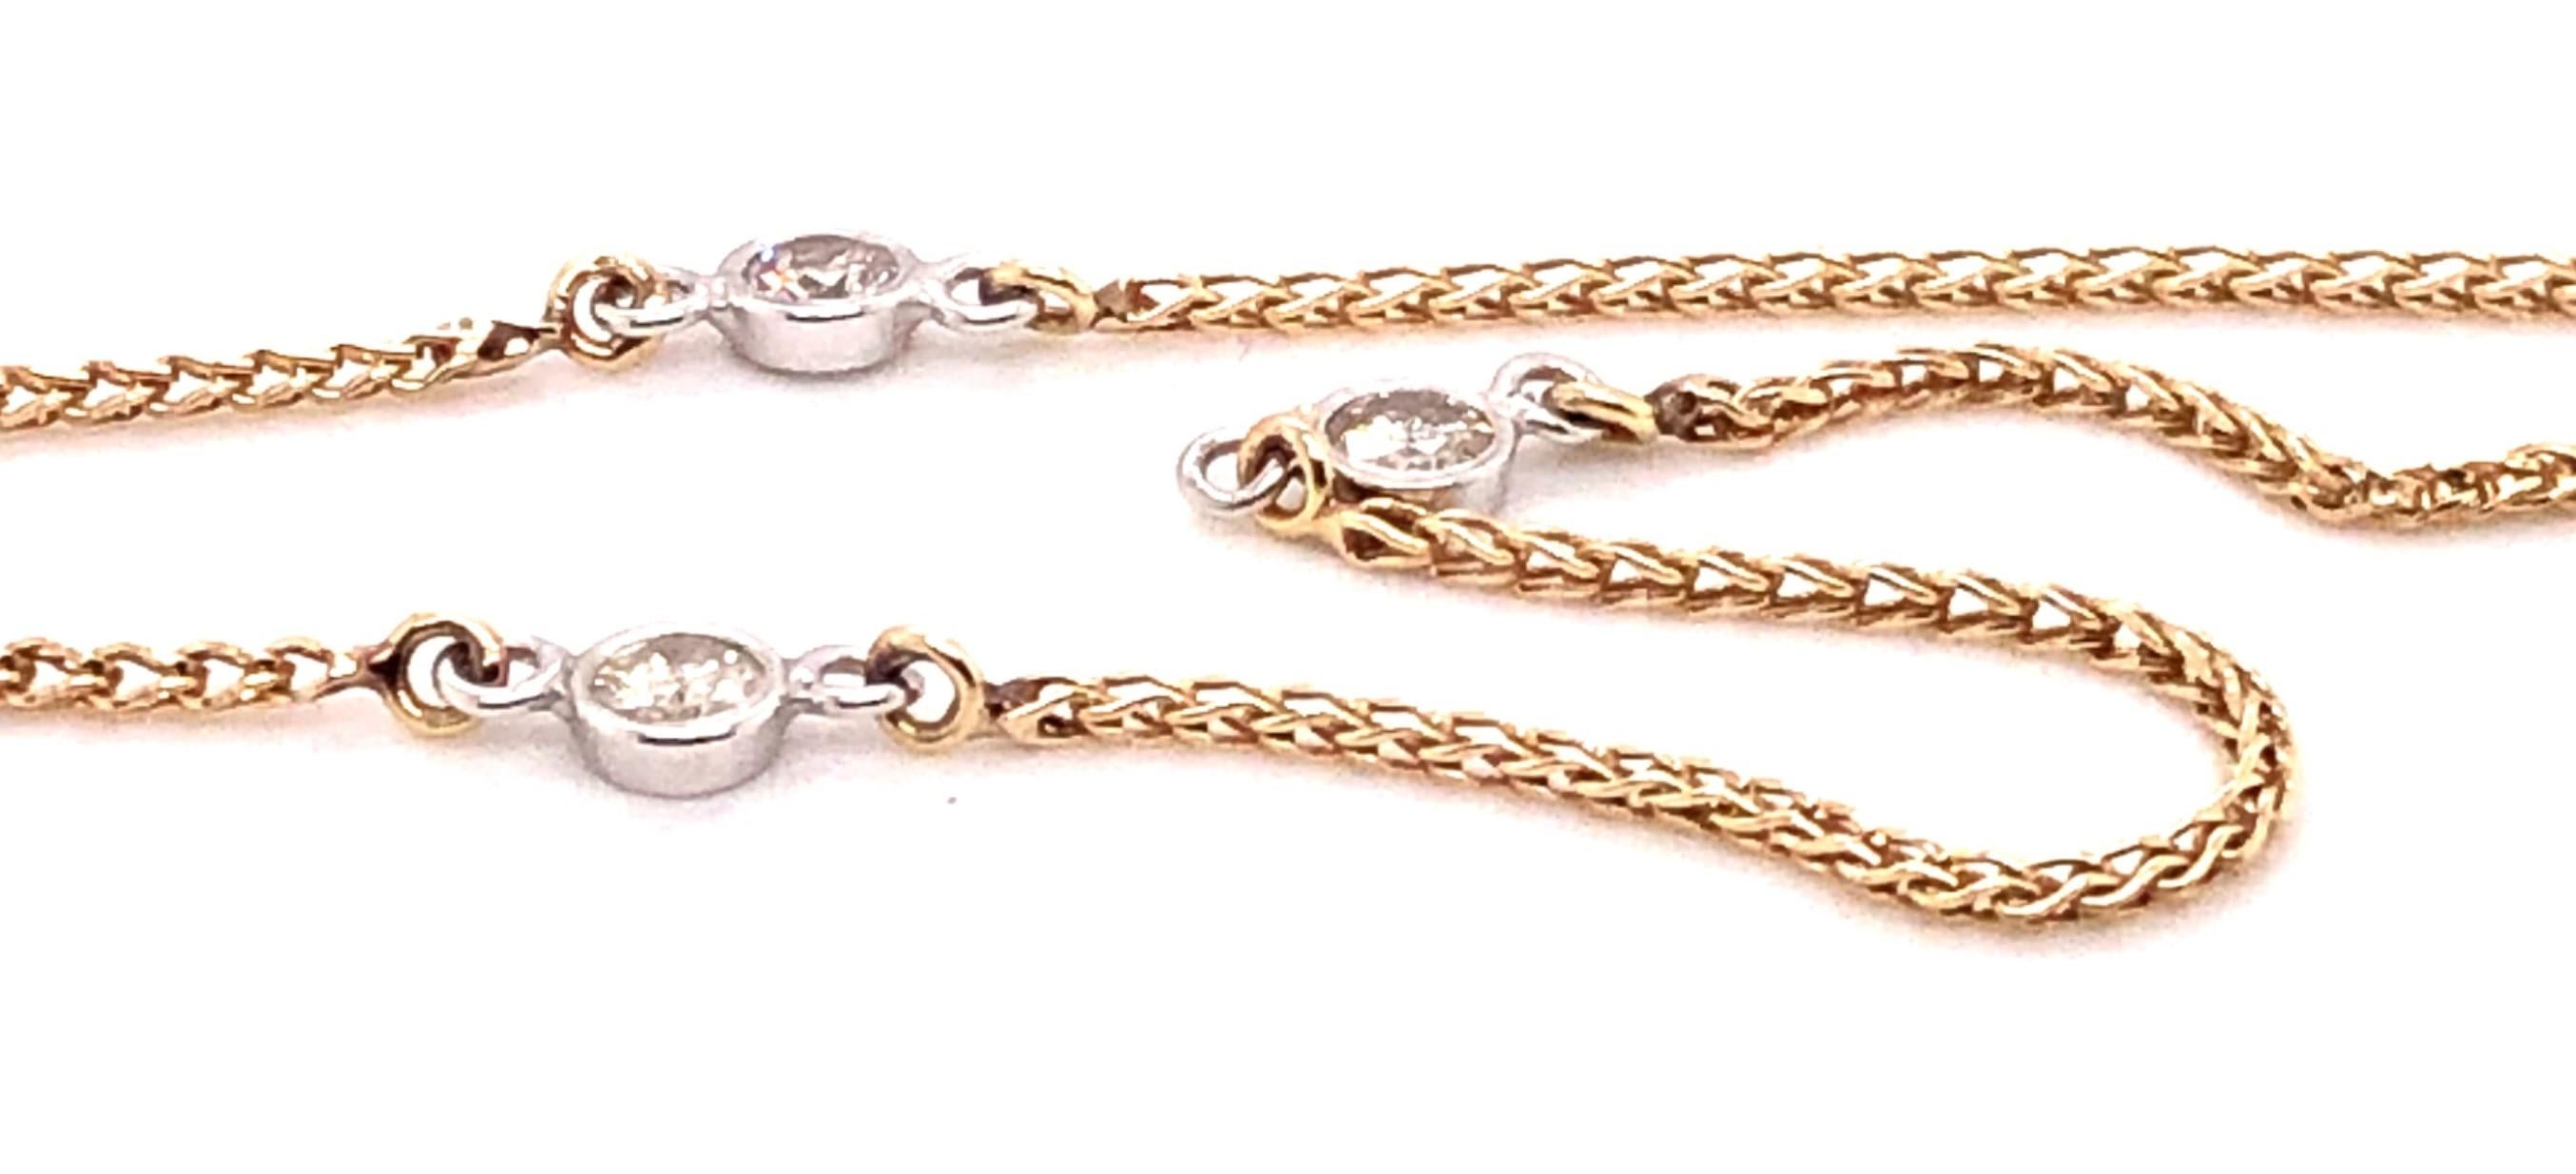 14 Karat Yellow Gold/White Gold necklace with 4 round cut diamonds.

The Diamonds are 1.00 carat weight H-I color and SI1-SI2 clarity.  Each one is approx. 1/8 inch around.

The necklace measures 16 inches.